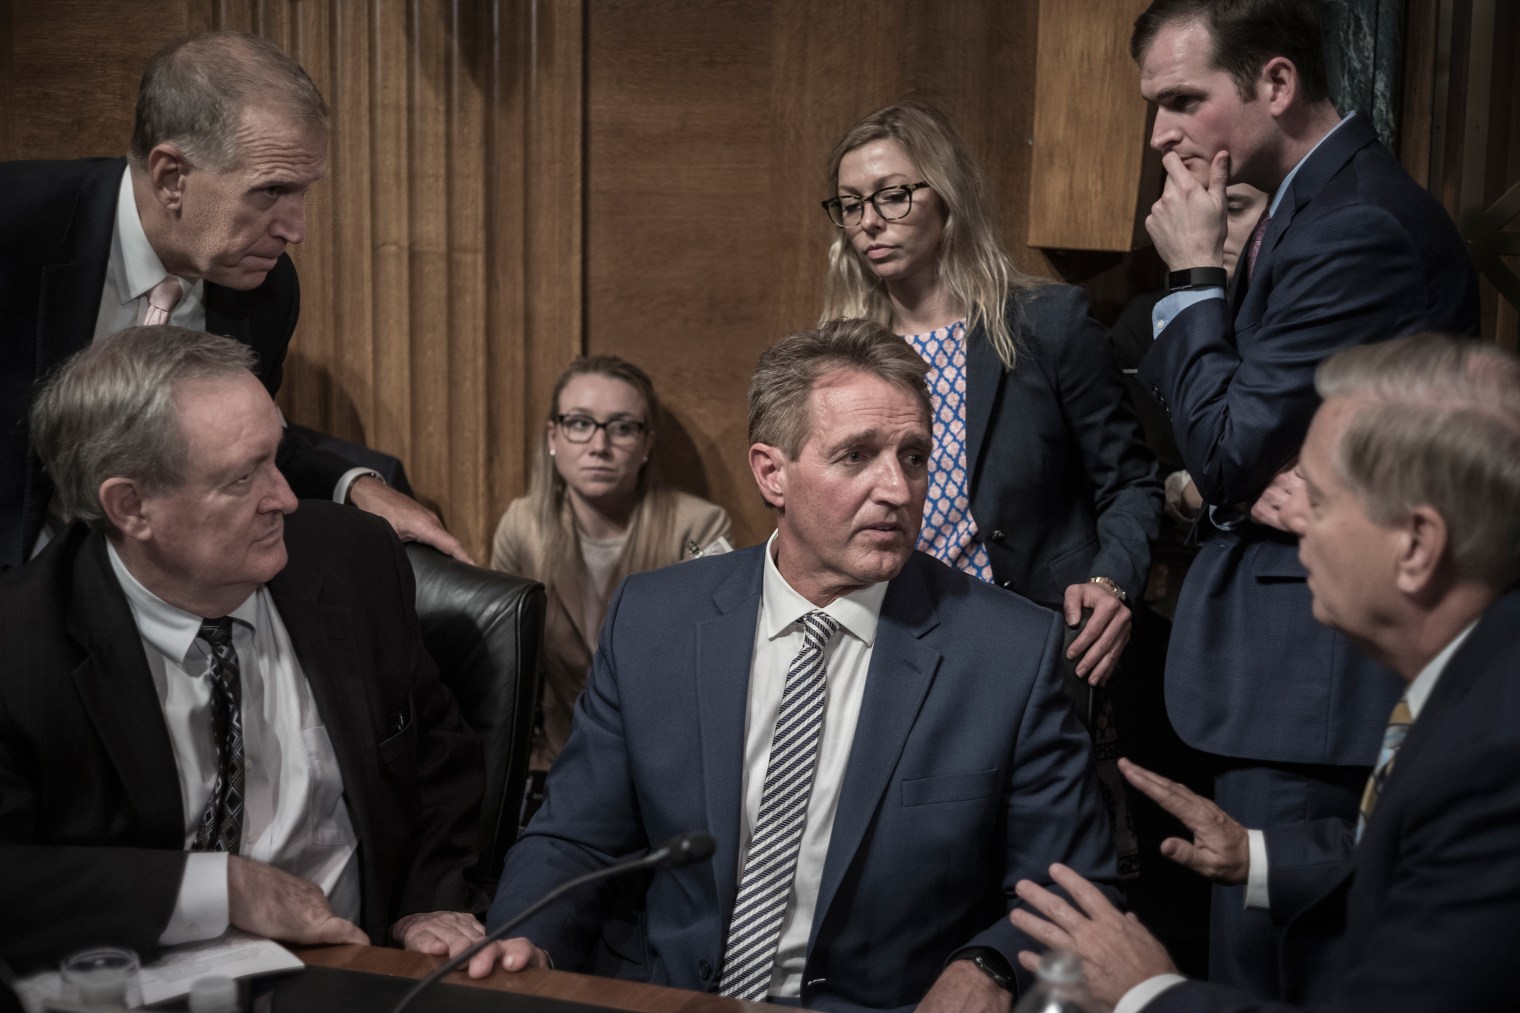 Jeff Flake, center, listens to fellow GOP Senator Lindsey Graham, right, on Sept. 28, moments after Flake called for a delay in Brett KavanaughÃ¢Â€Â™s Supreme Court confirmation